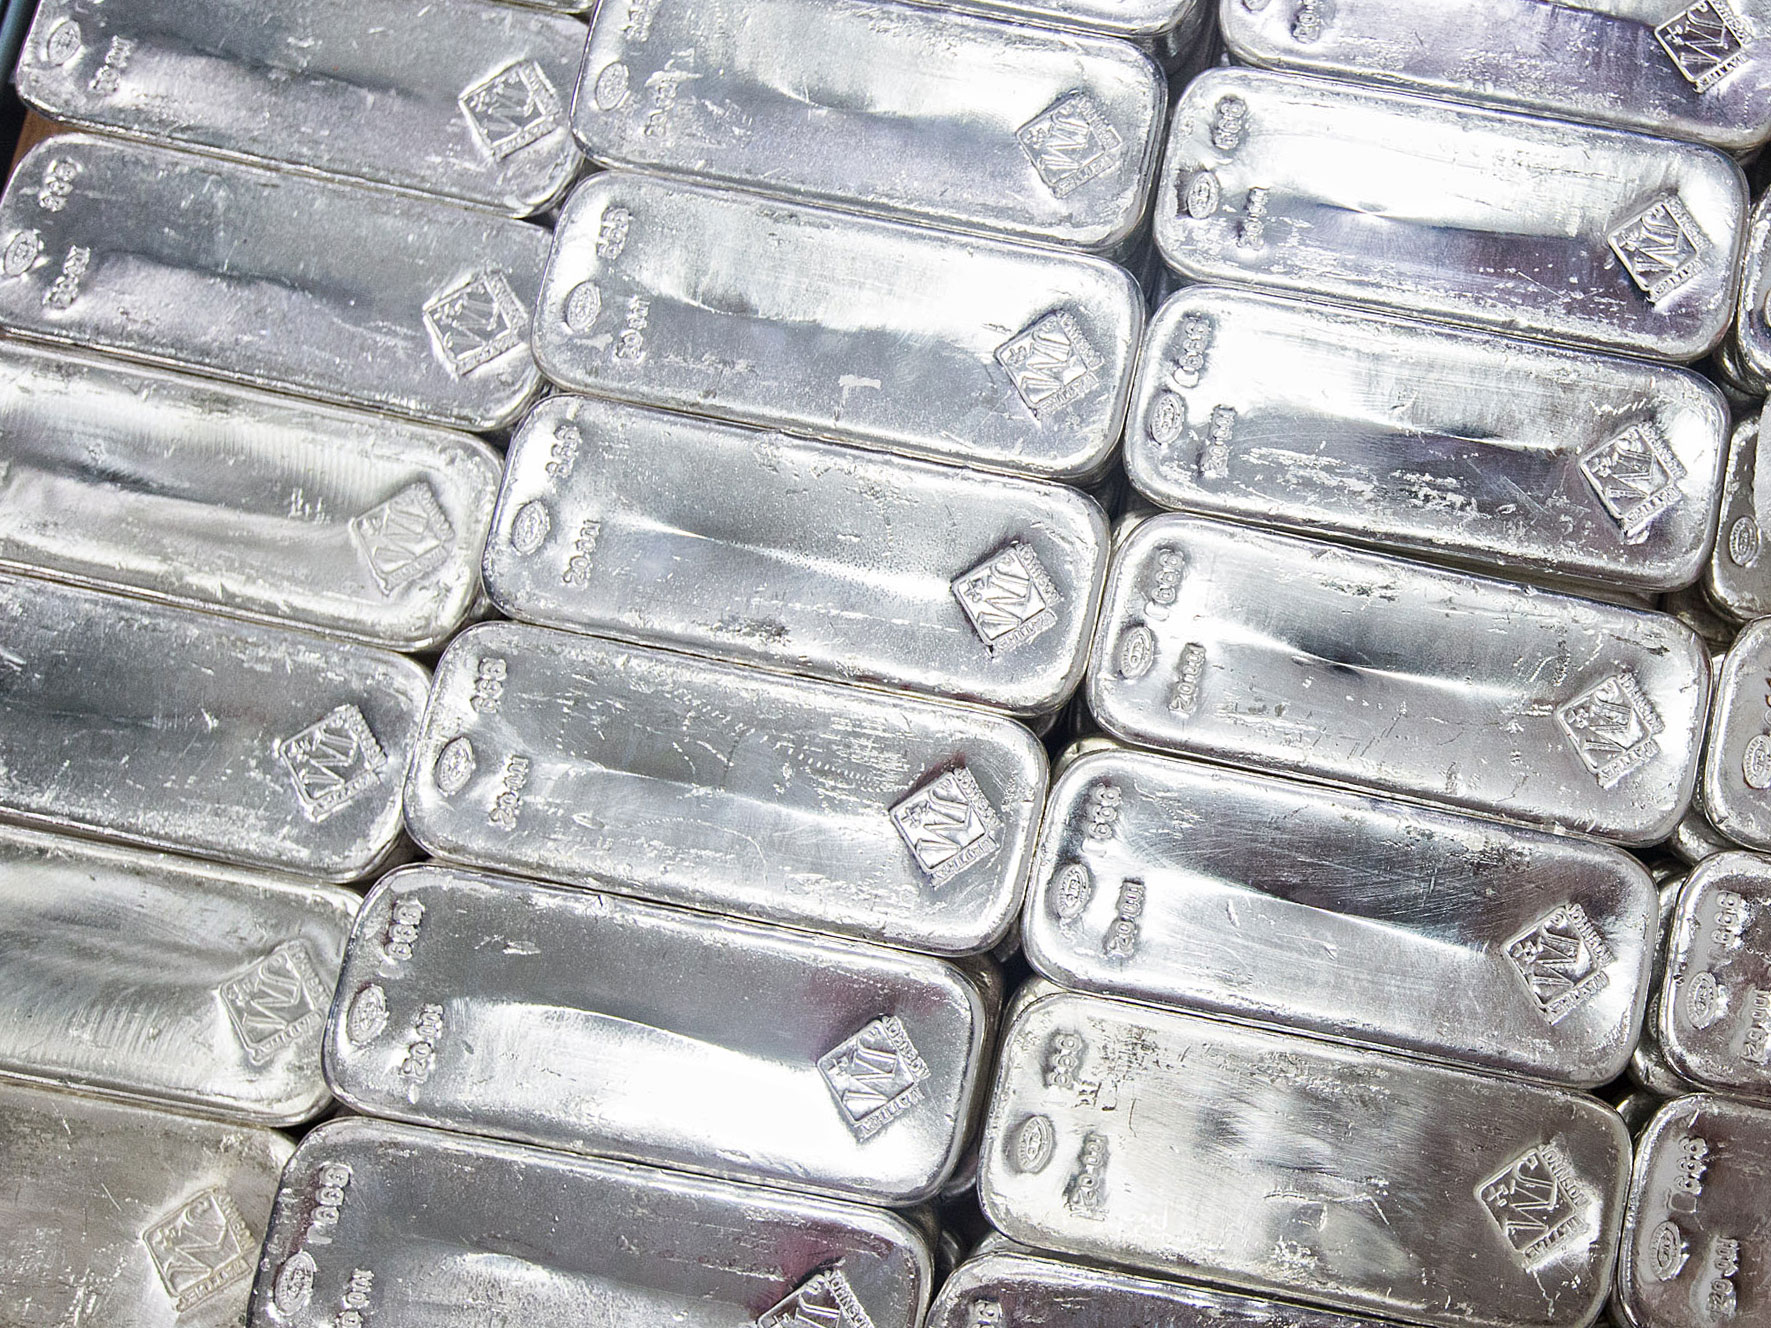 The salvaged silver bars from the WW2 wreck of the SS Tilawa were valued at USD 43 million. 

Image Source: Bloomberg 